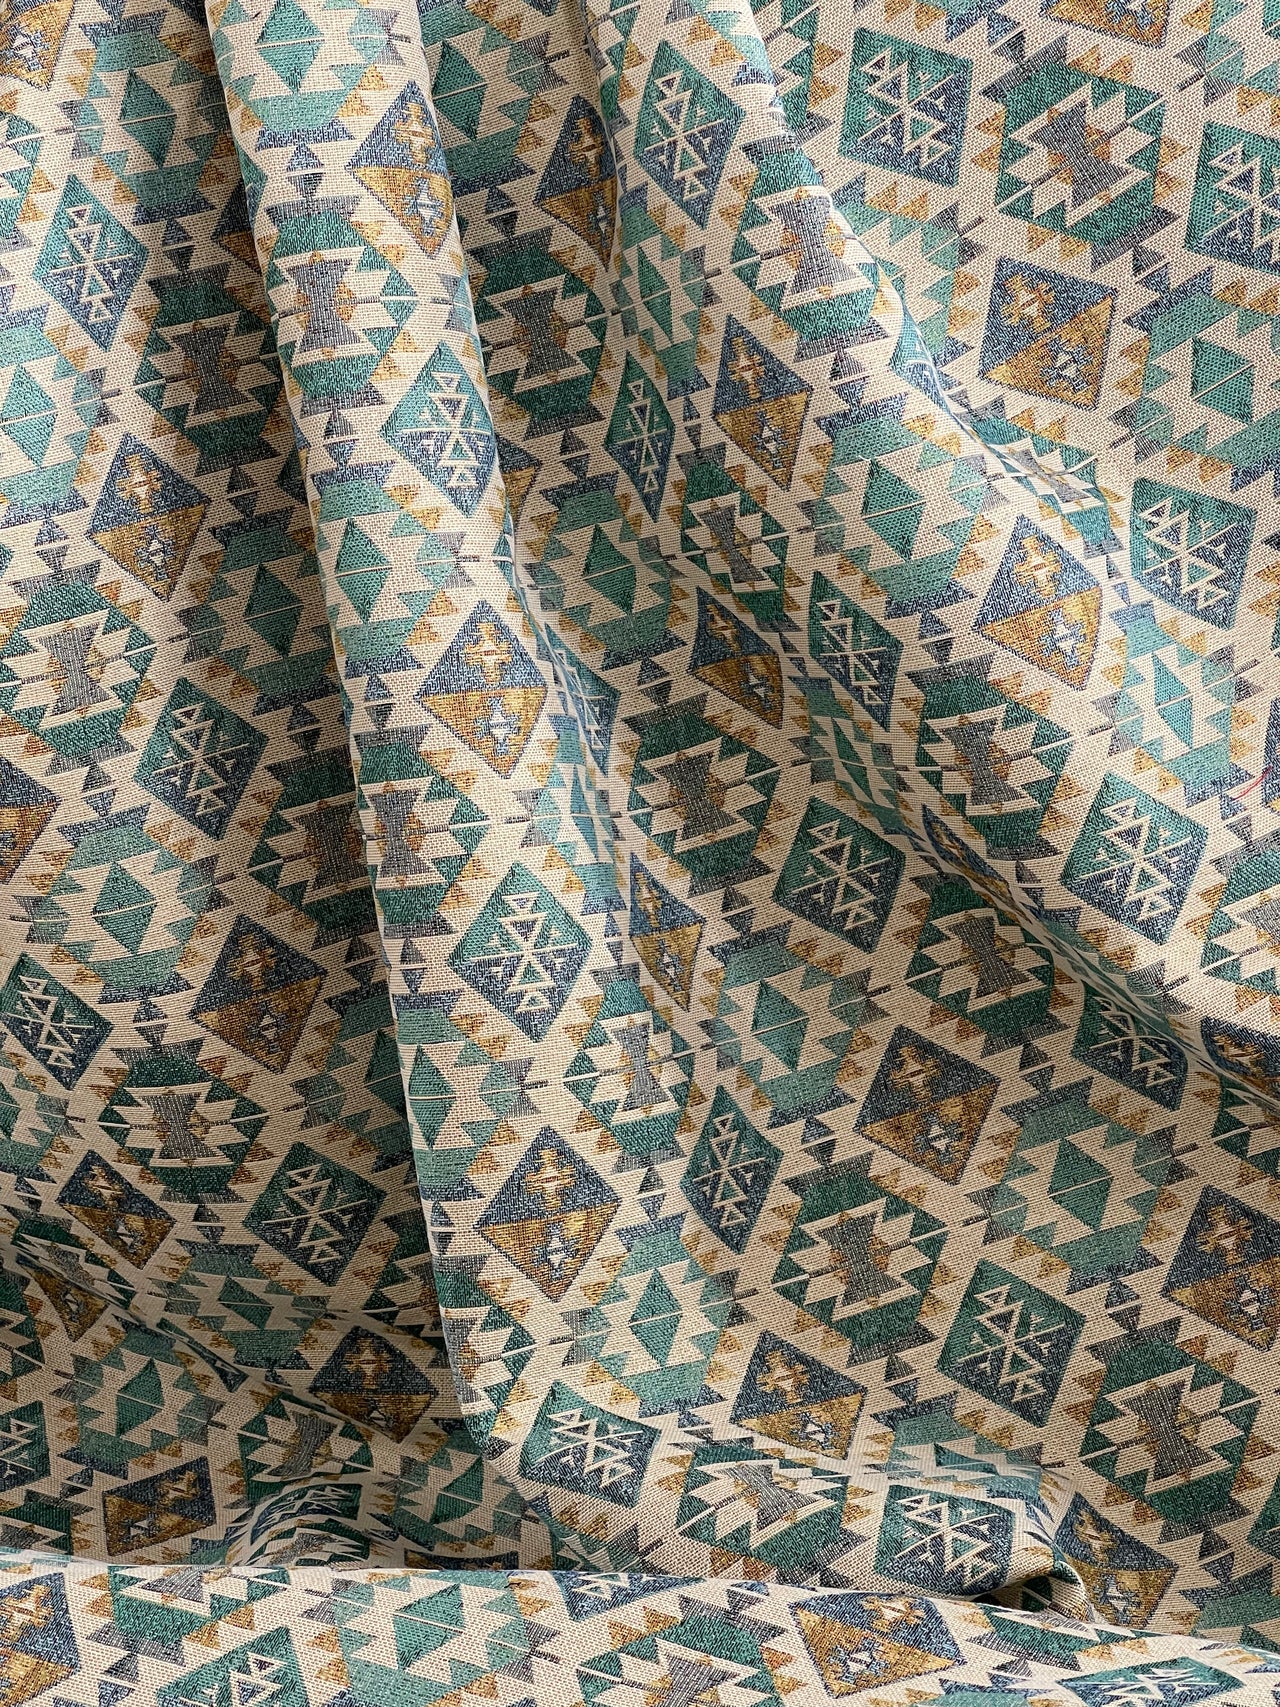 Moroccan-Inspired Kilim Fabric: Blue, Yellow, and Green - Elevate Your Unique Home Decor - Sold by the Metre